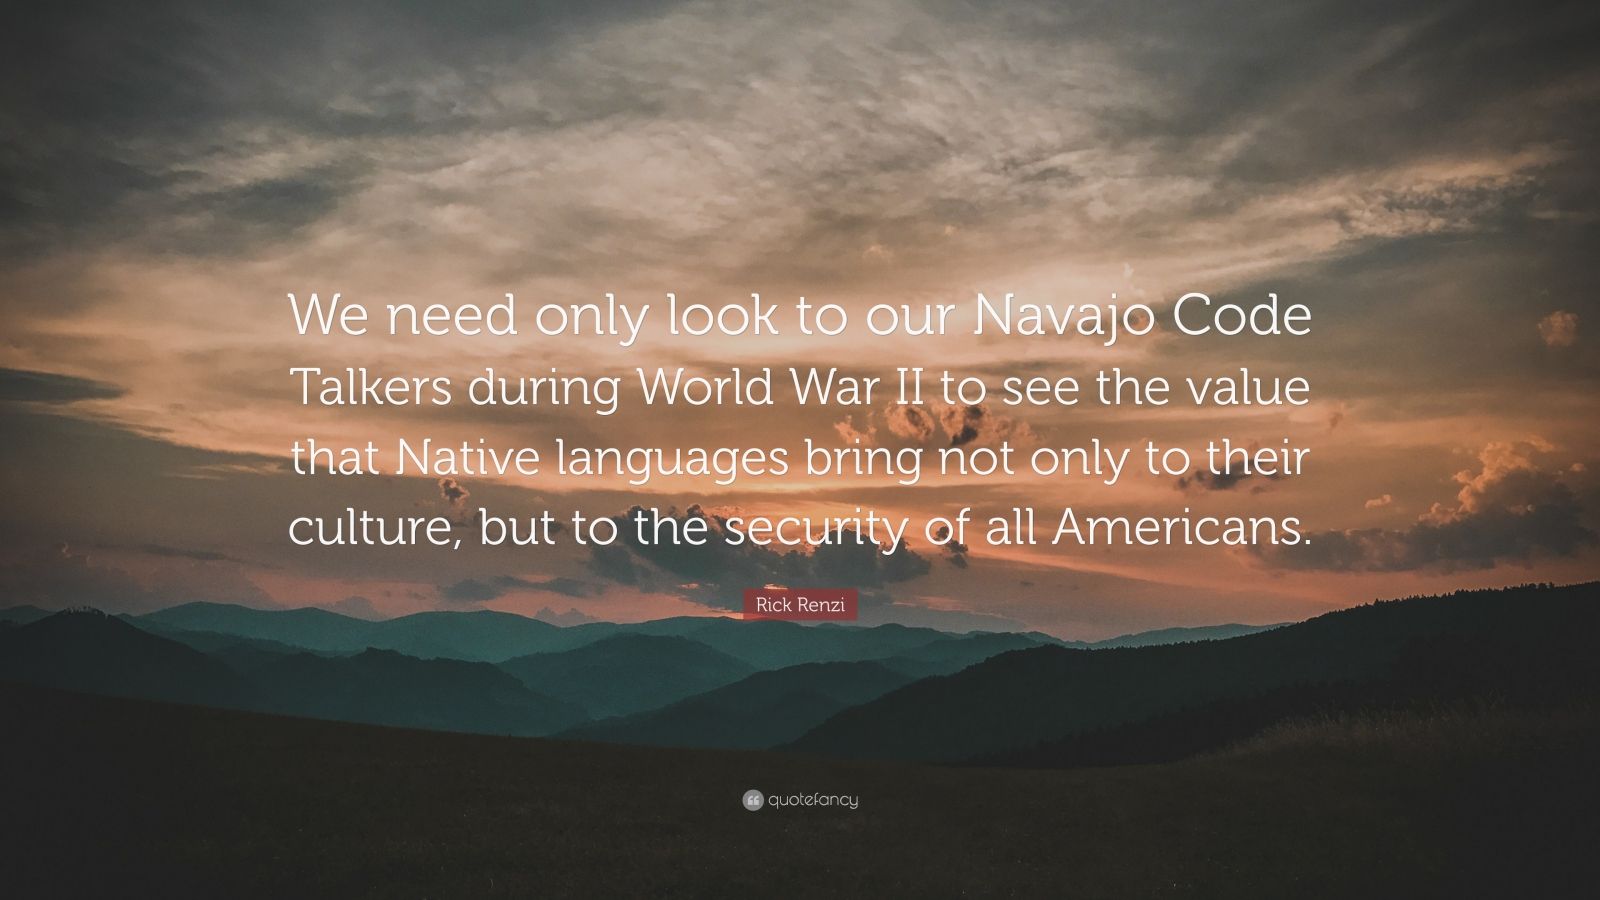 Rick Renzi Quote: "We need only look to our Navajo Code Talkers during World War II to see the ...